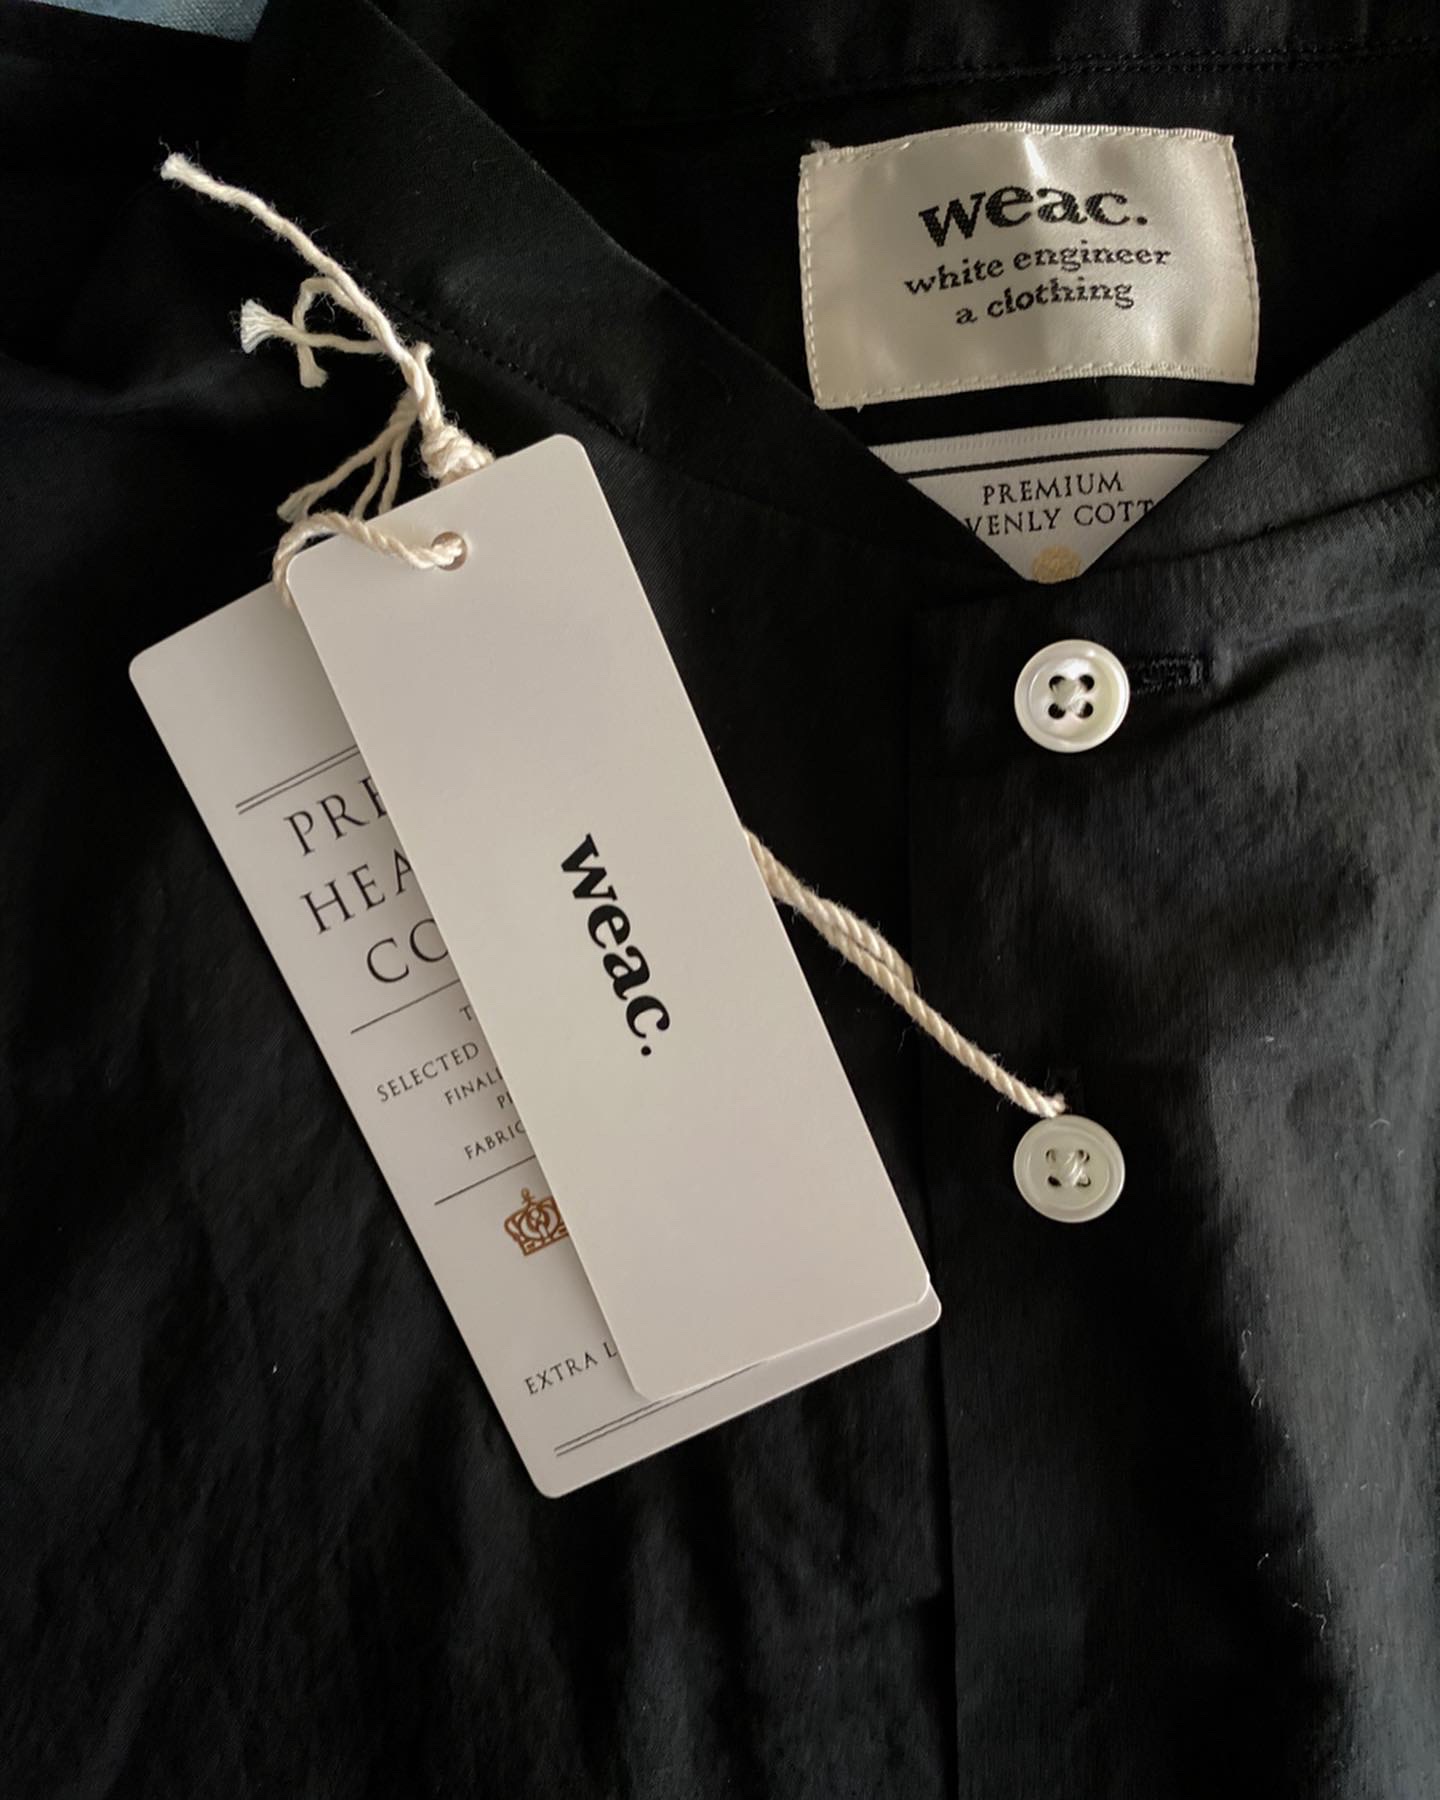 Read more about the article 【weac.】人気のチビ衿シャツ”CHIVIC”が入荷しました。